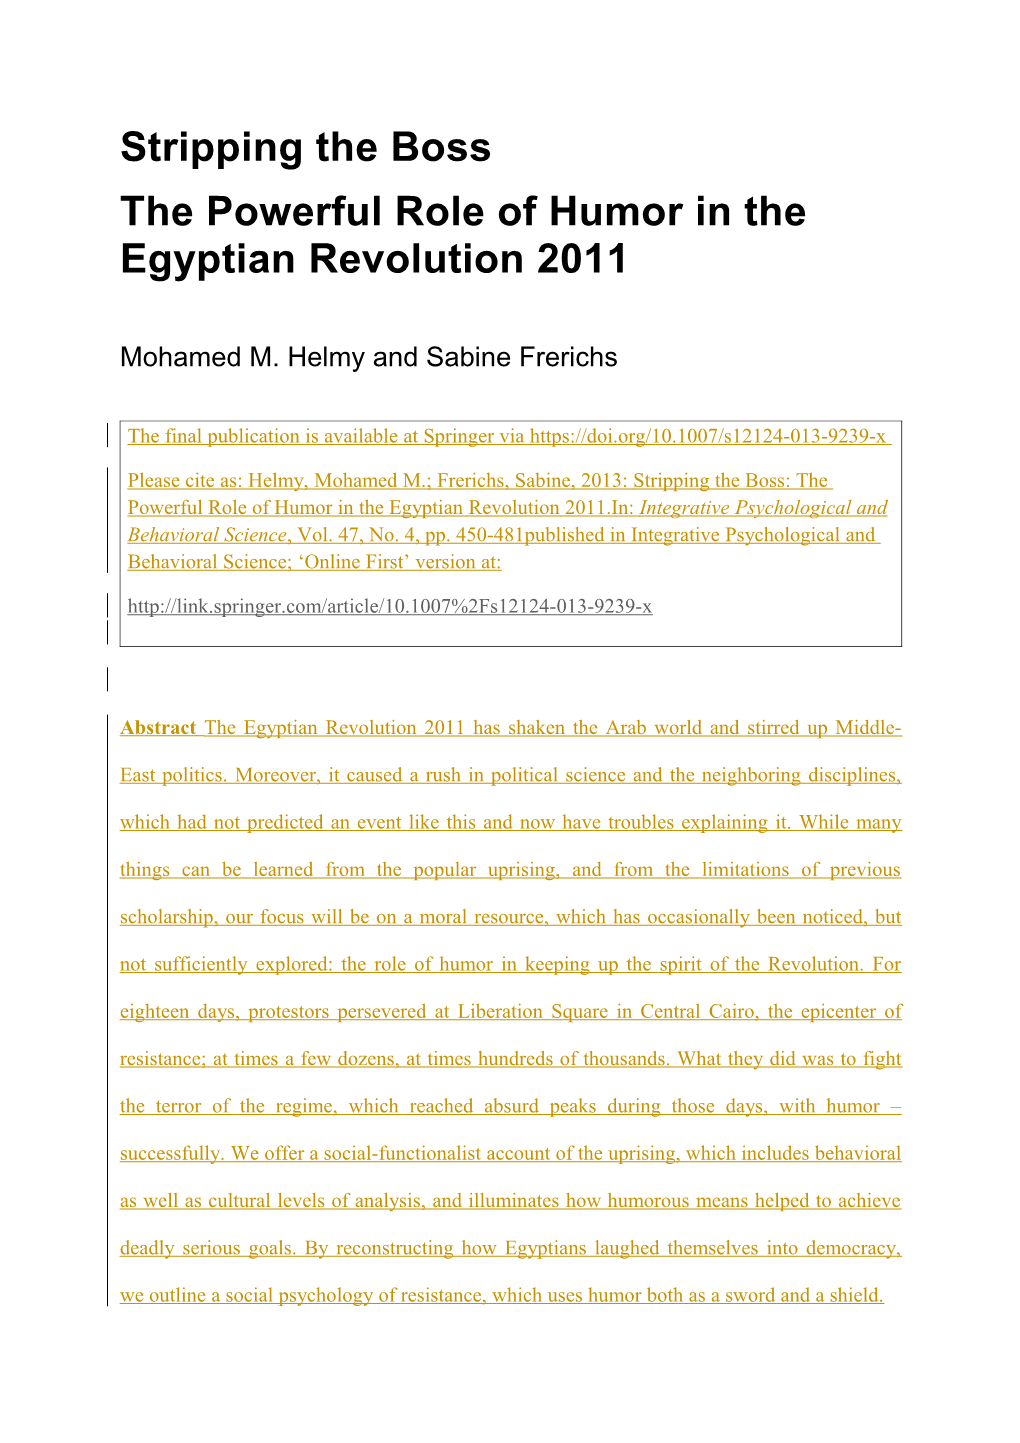 The Powerful Role of Humor in the Egyptian Revolution 2011